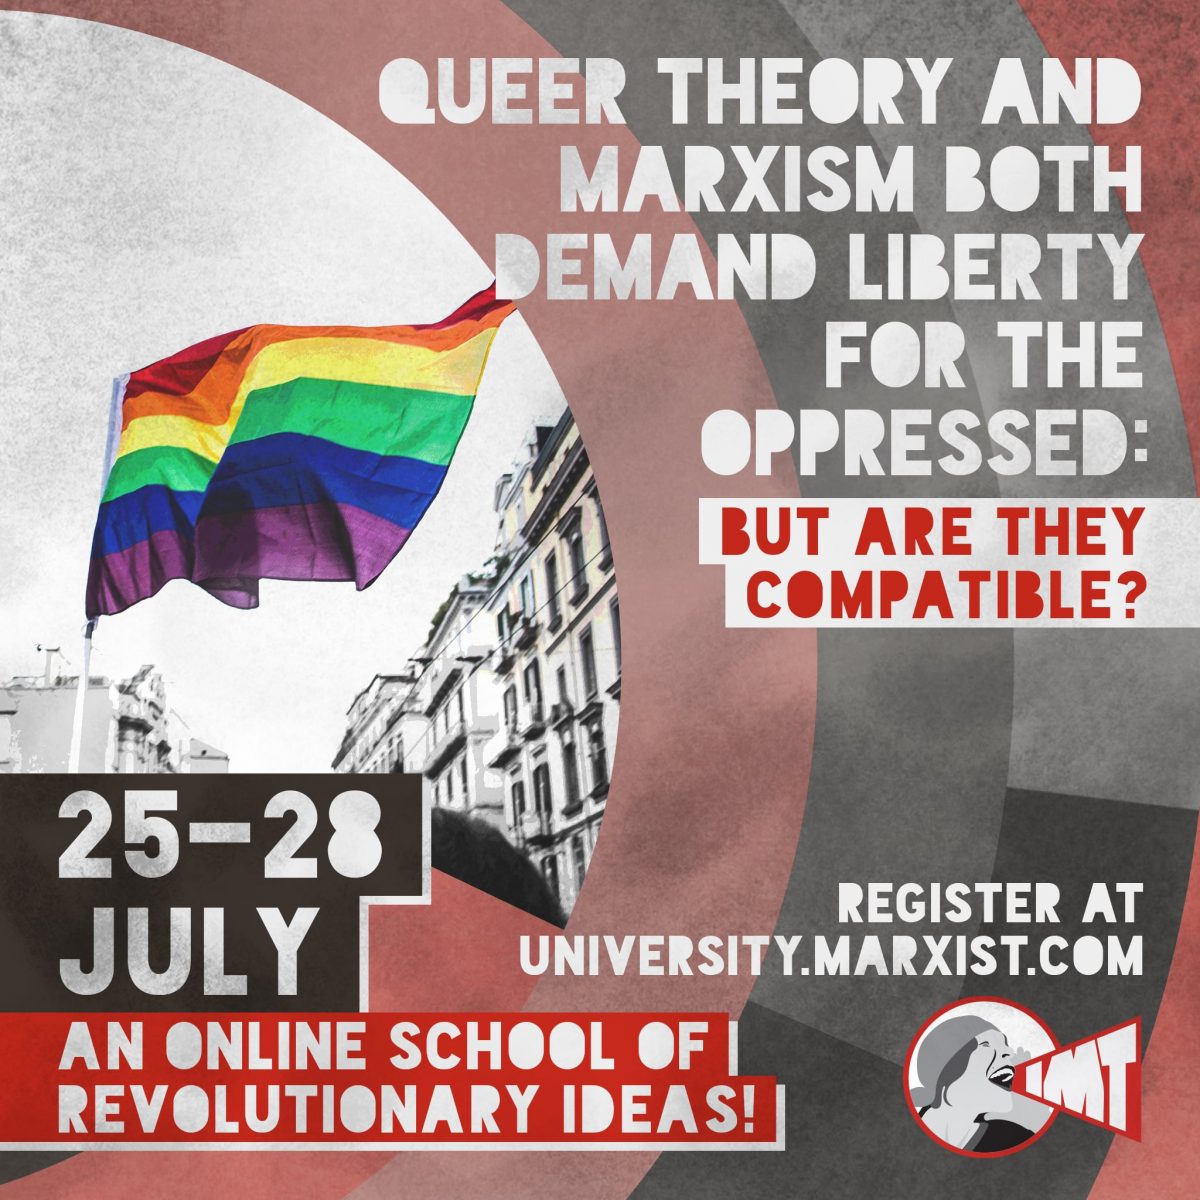 Liberty through struggle - Marxism vs. Queer Theory